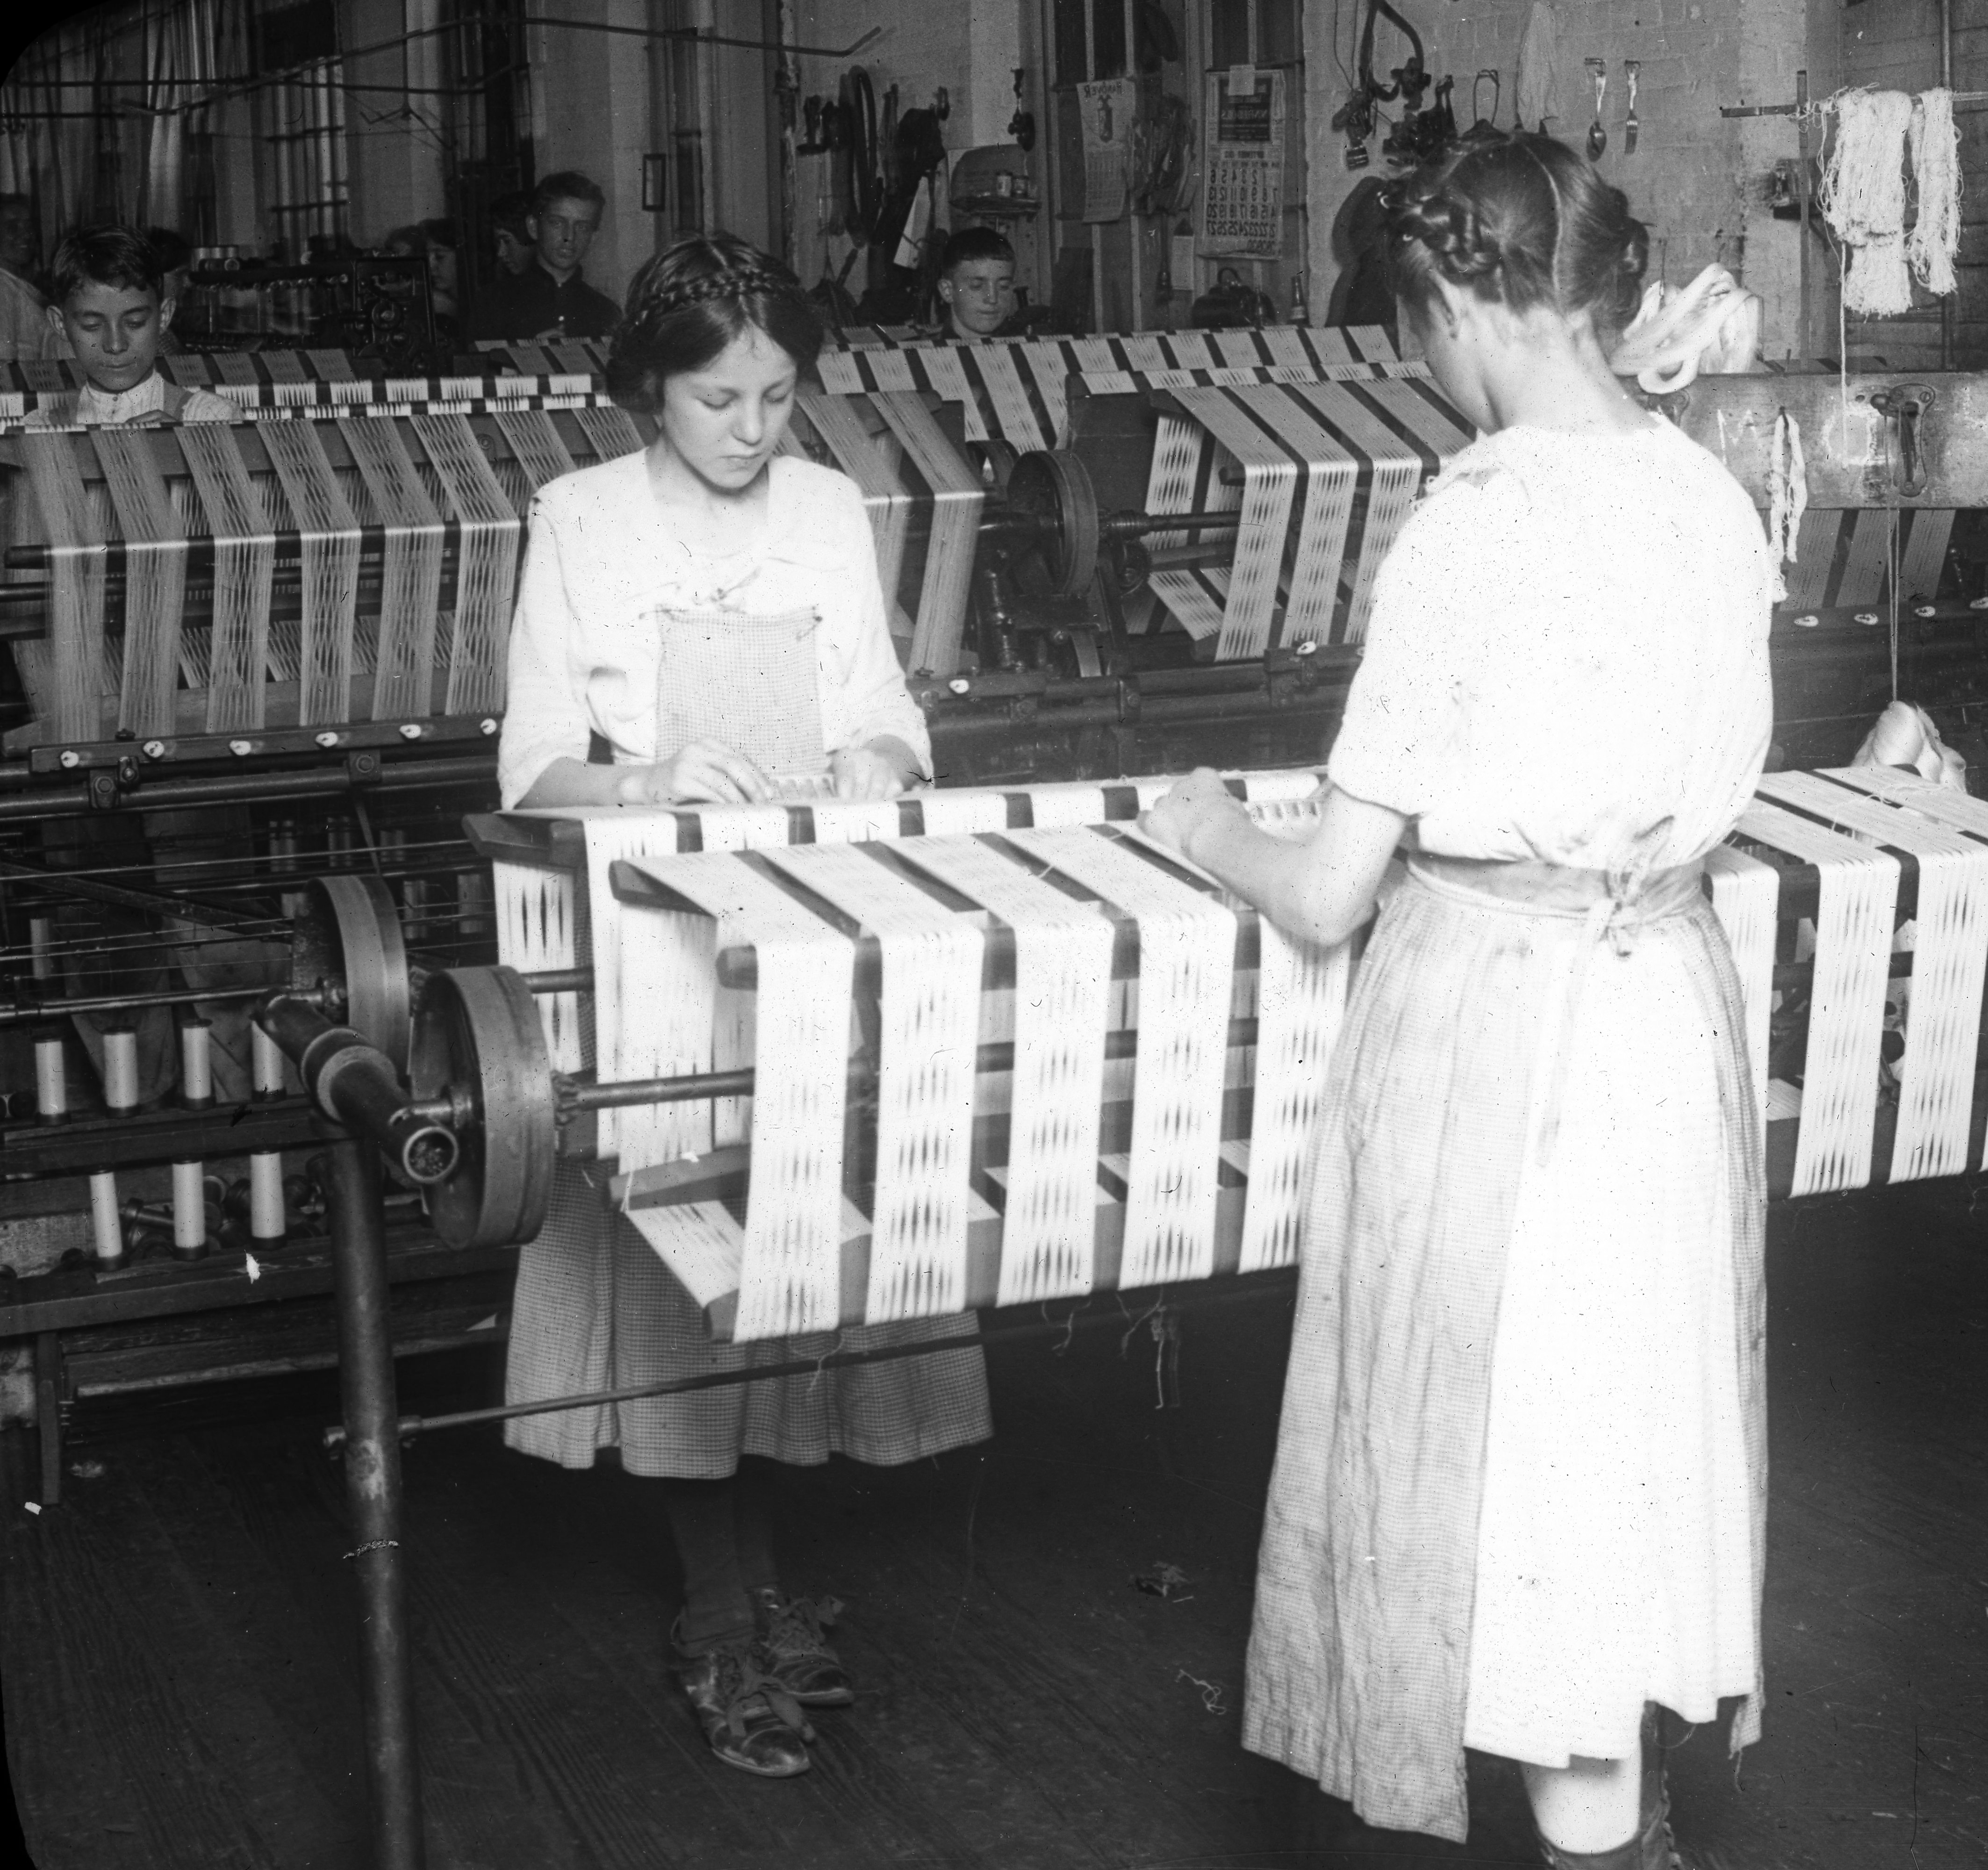 Black and white image of two young women working at a stand of silk manufacturing machinery.